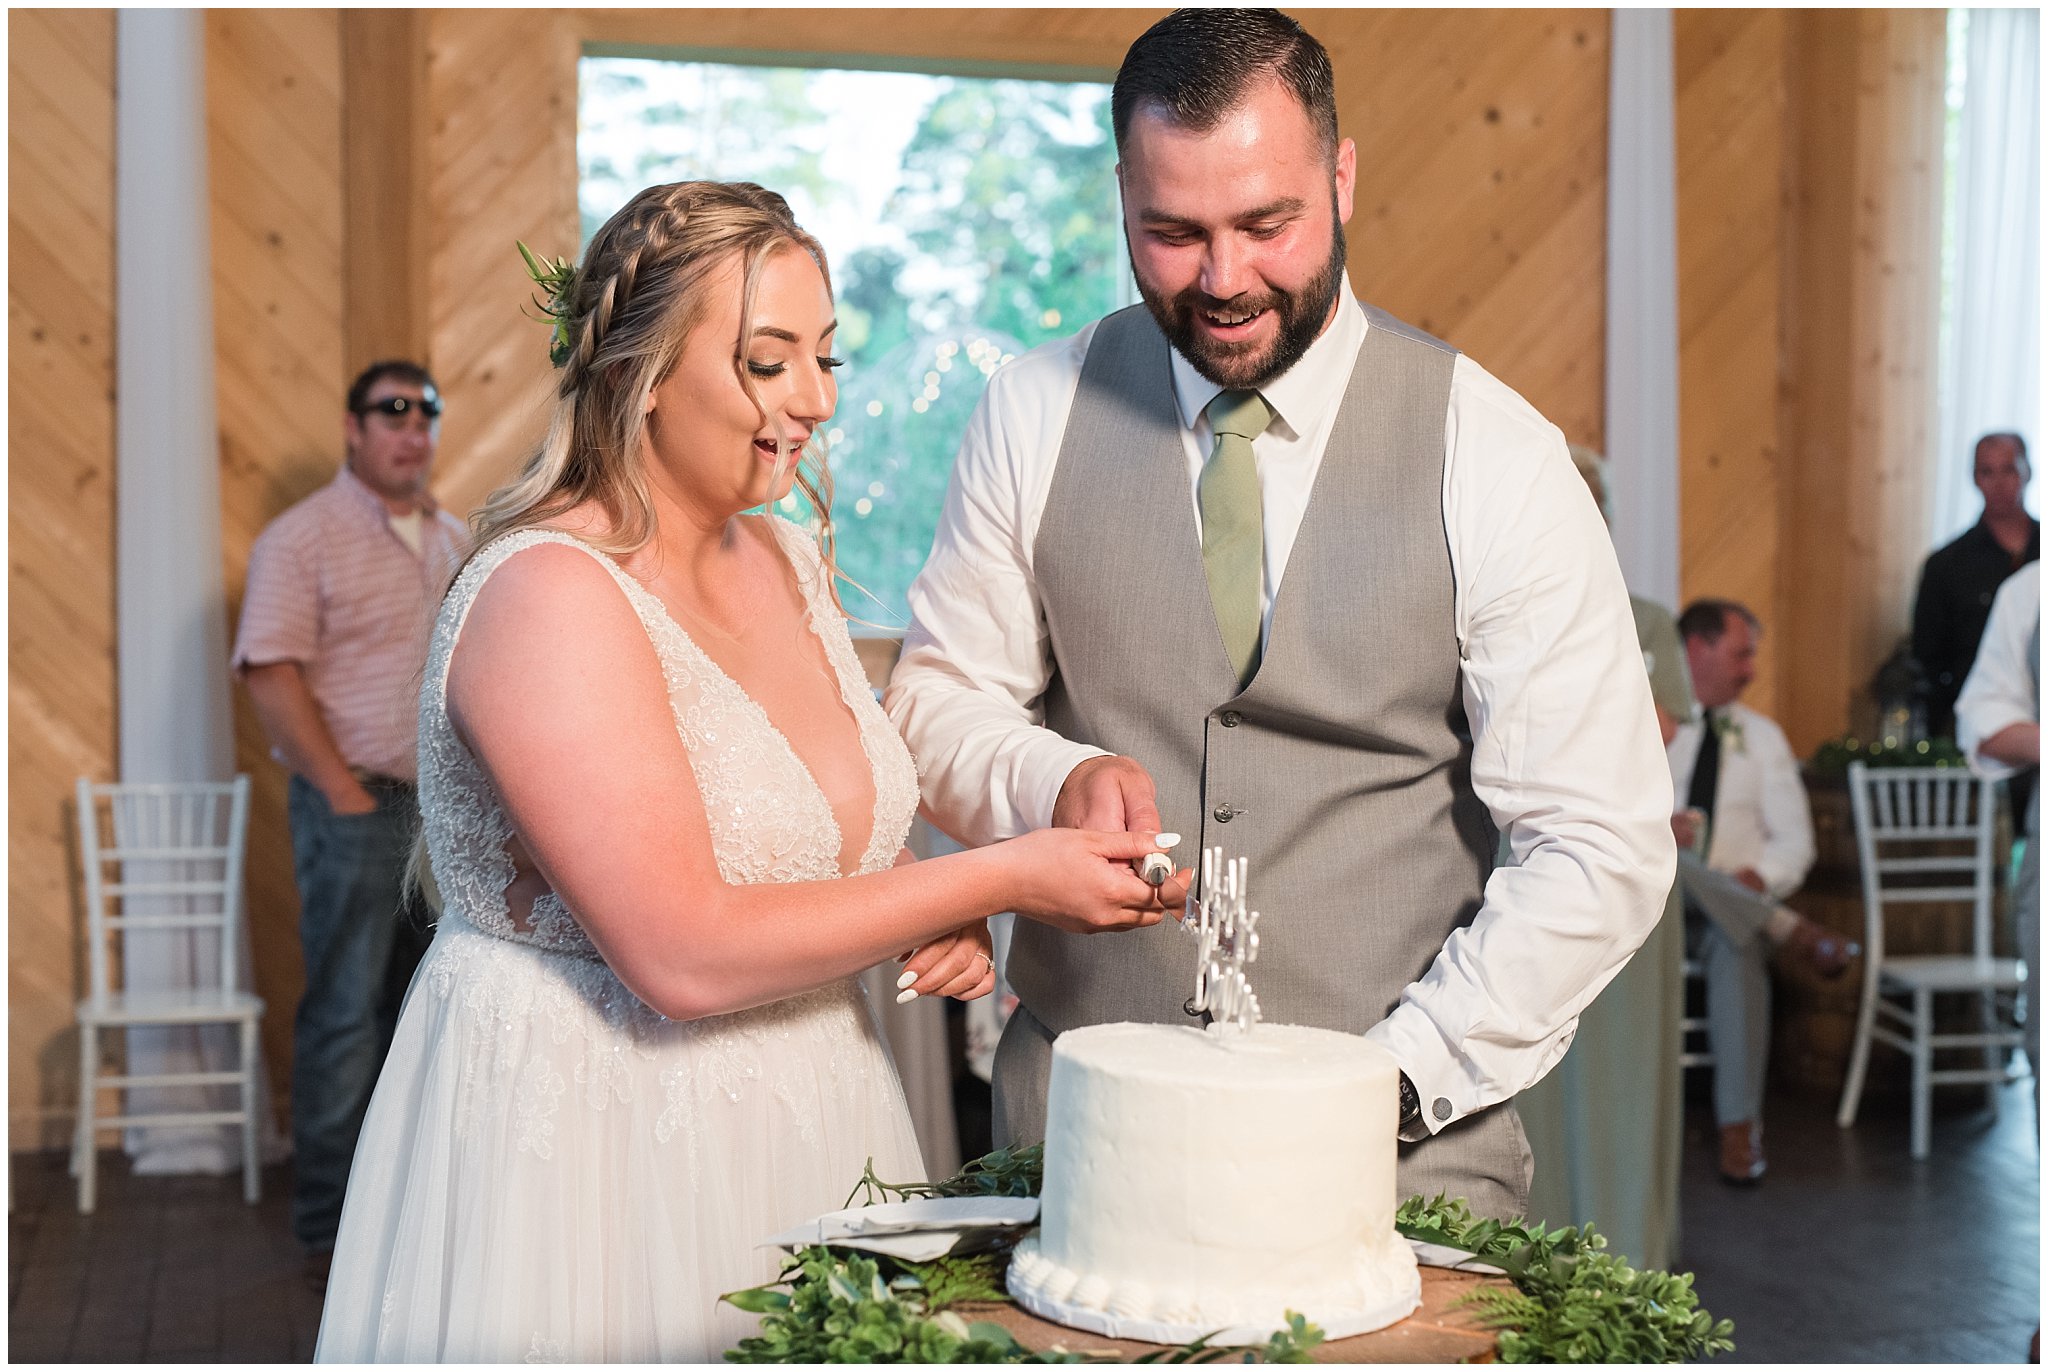 Cake cutting in bar with lots of emotion | Sage Green and Gray Summer Wedding at Oak Hills | Jessie and Dallin Photography